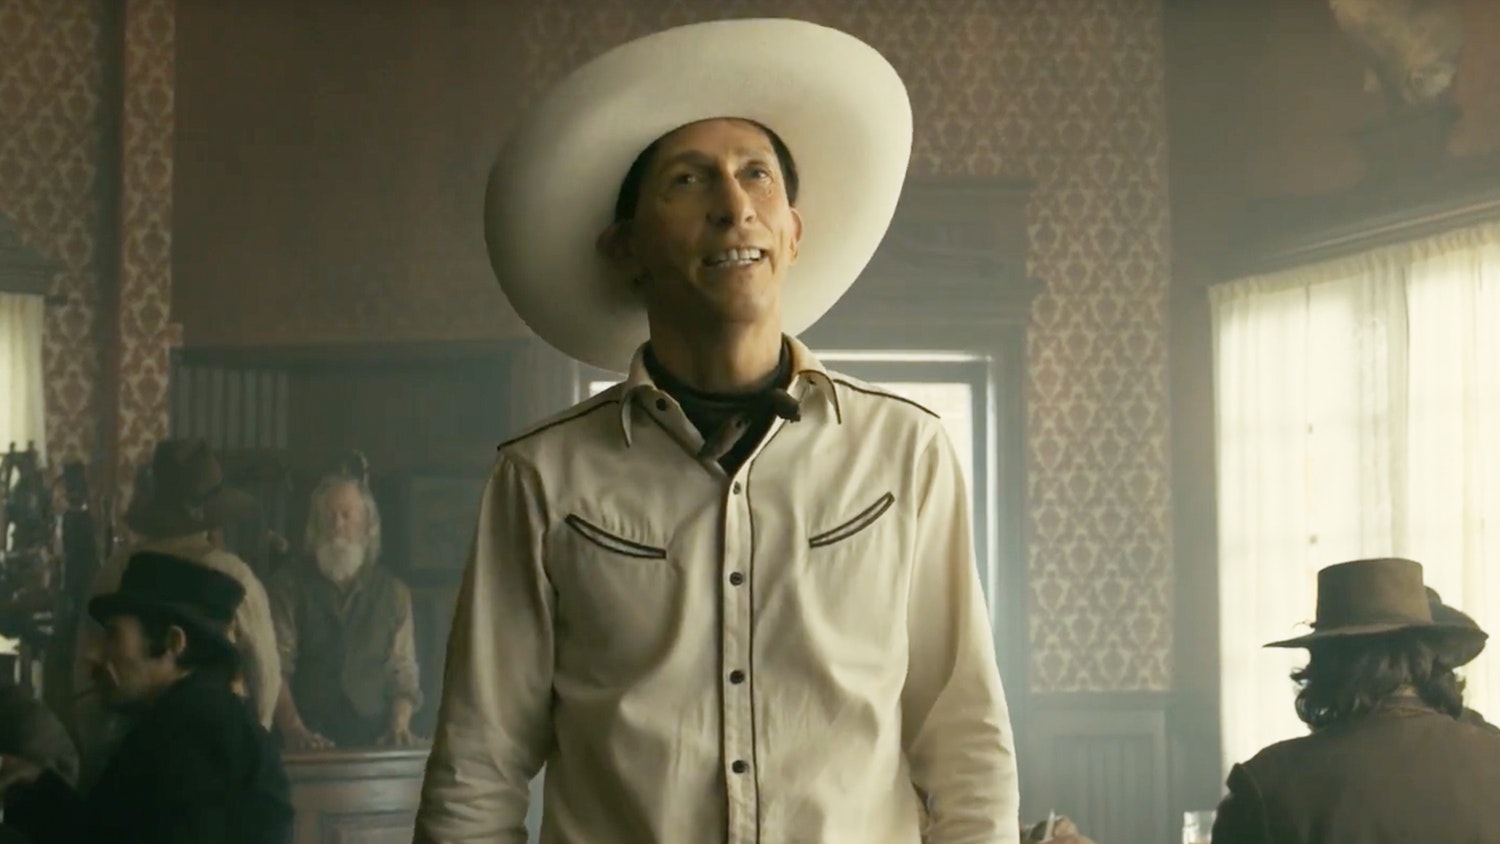 Coen Brothers' The Ballad of Buster Scruggs works in fits and